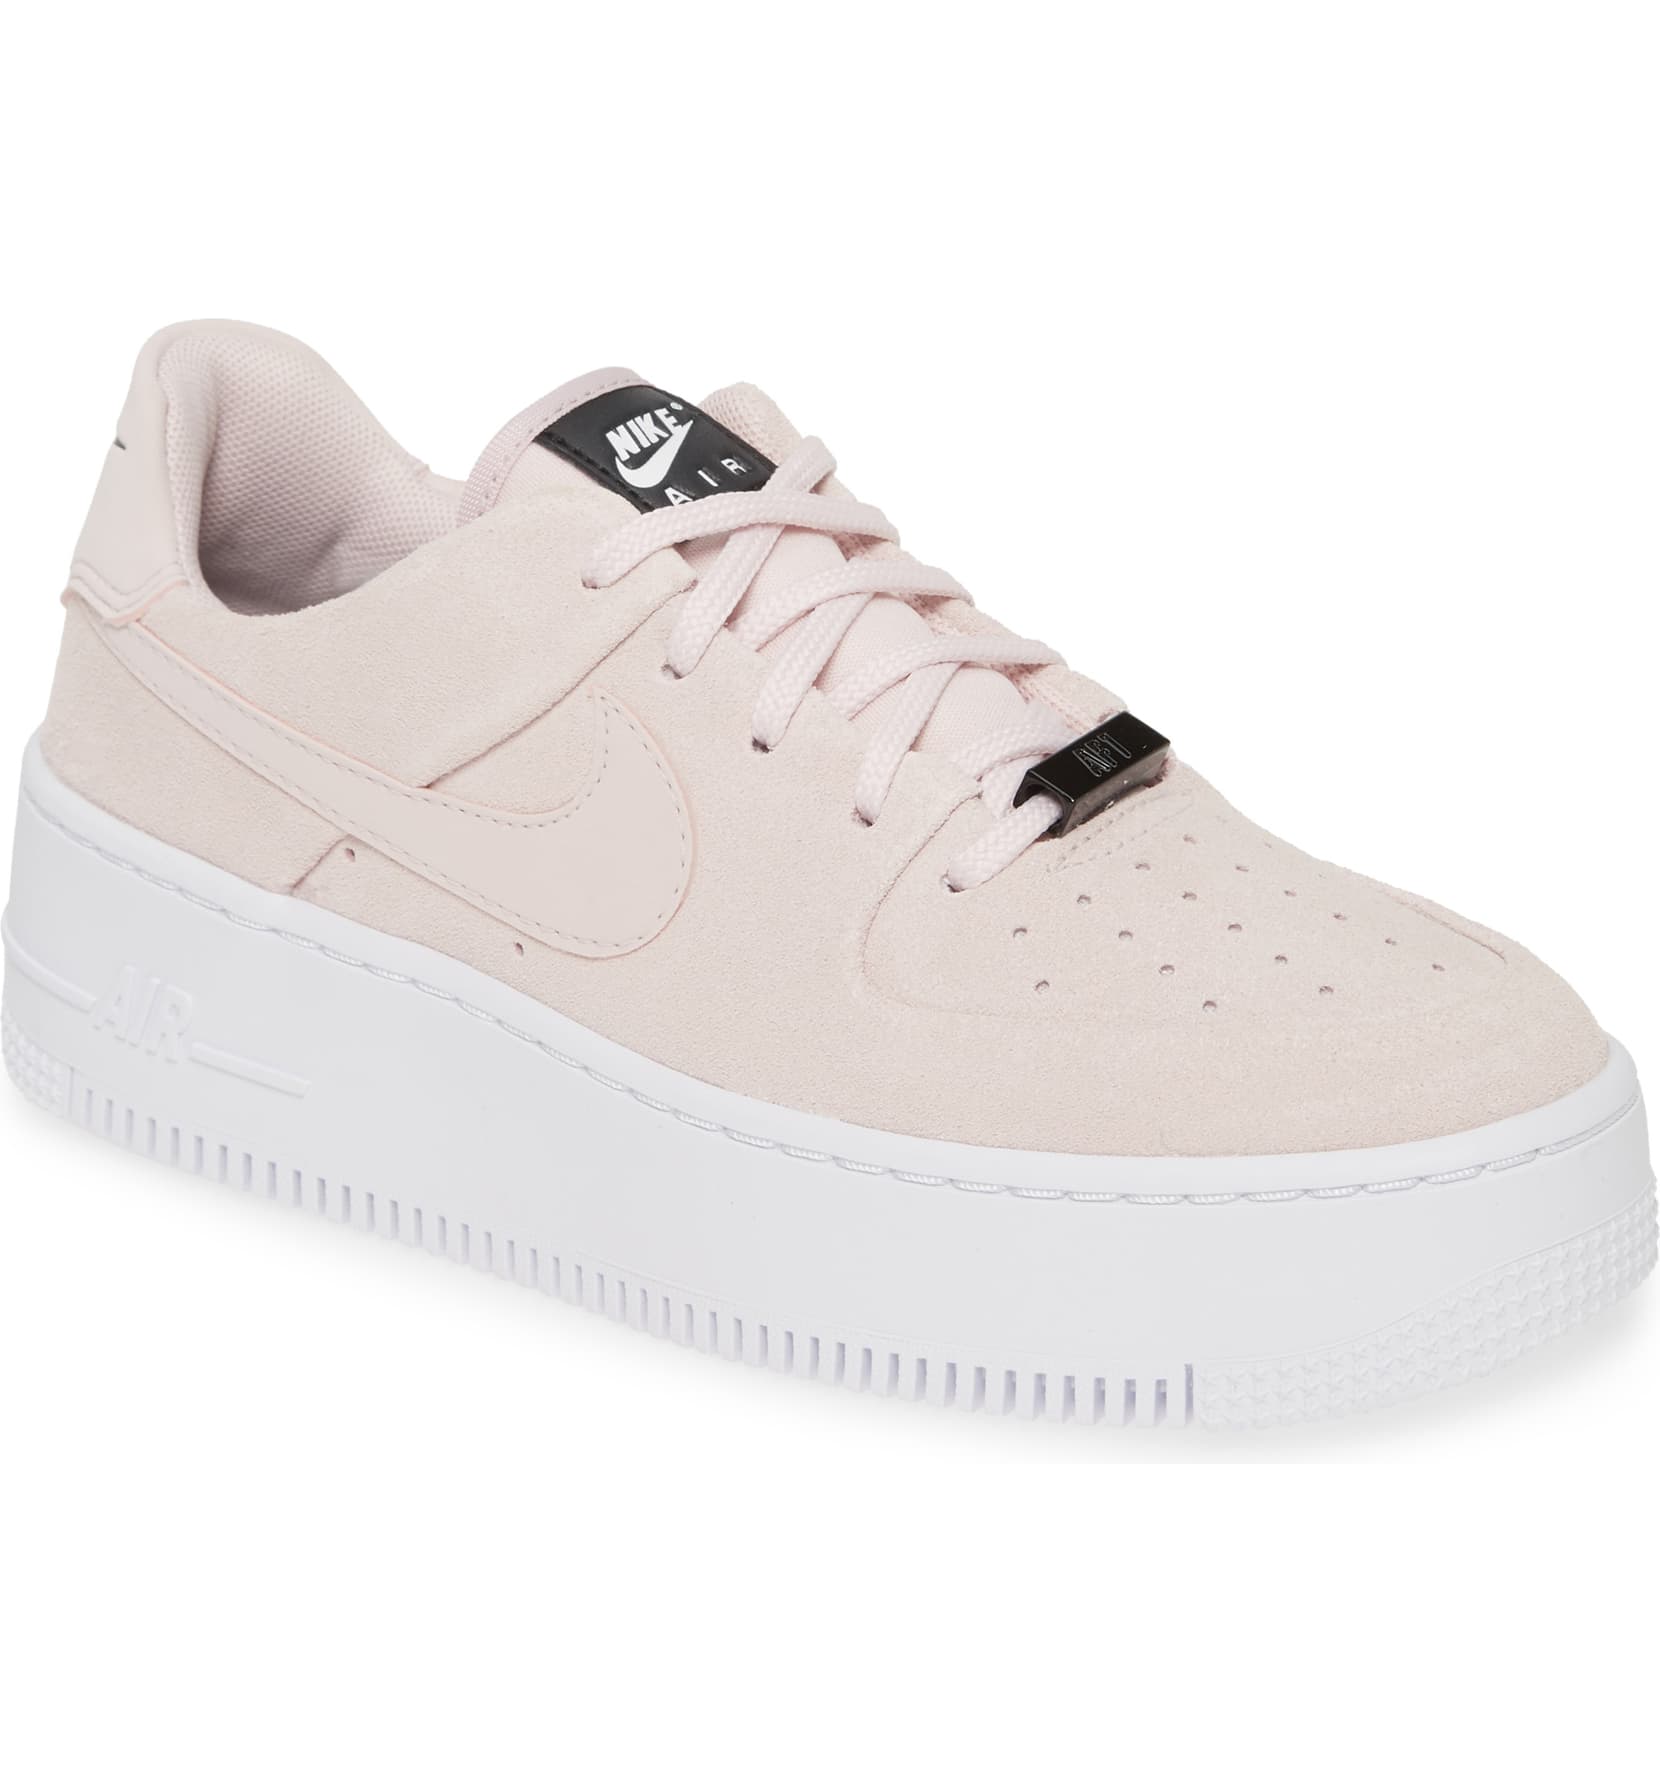 nordstrom nike air force 1 sage cheap 